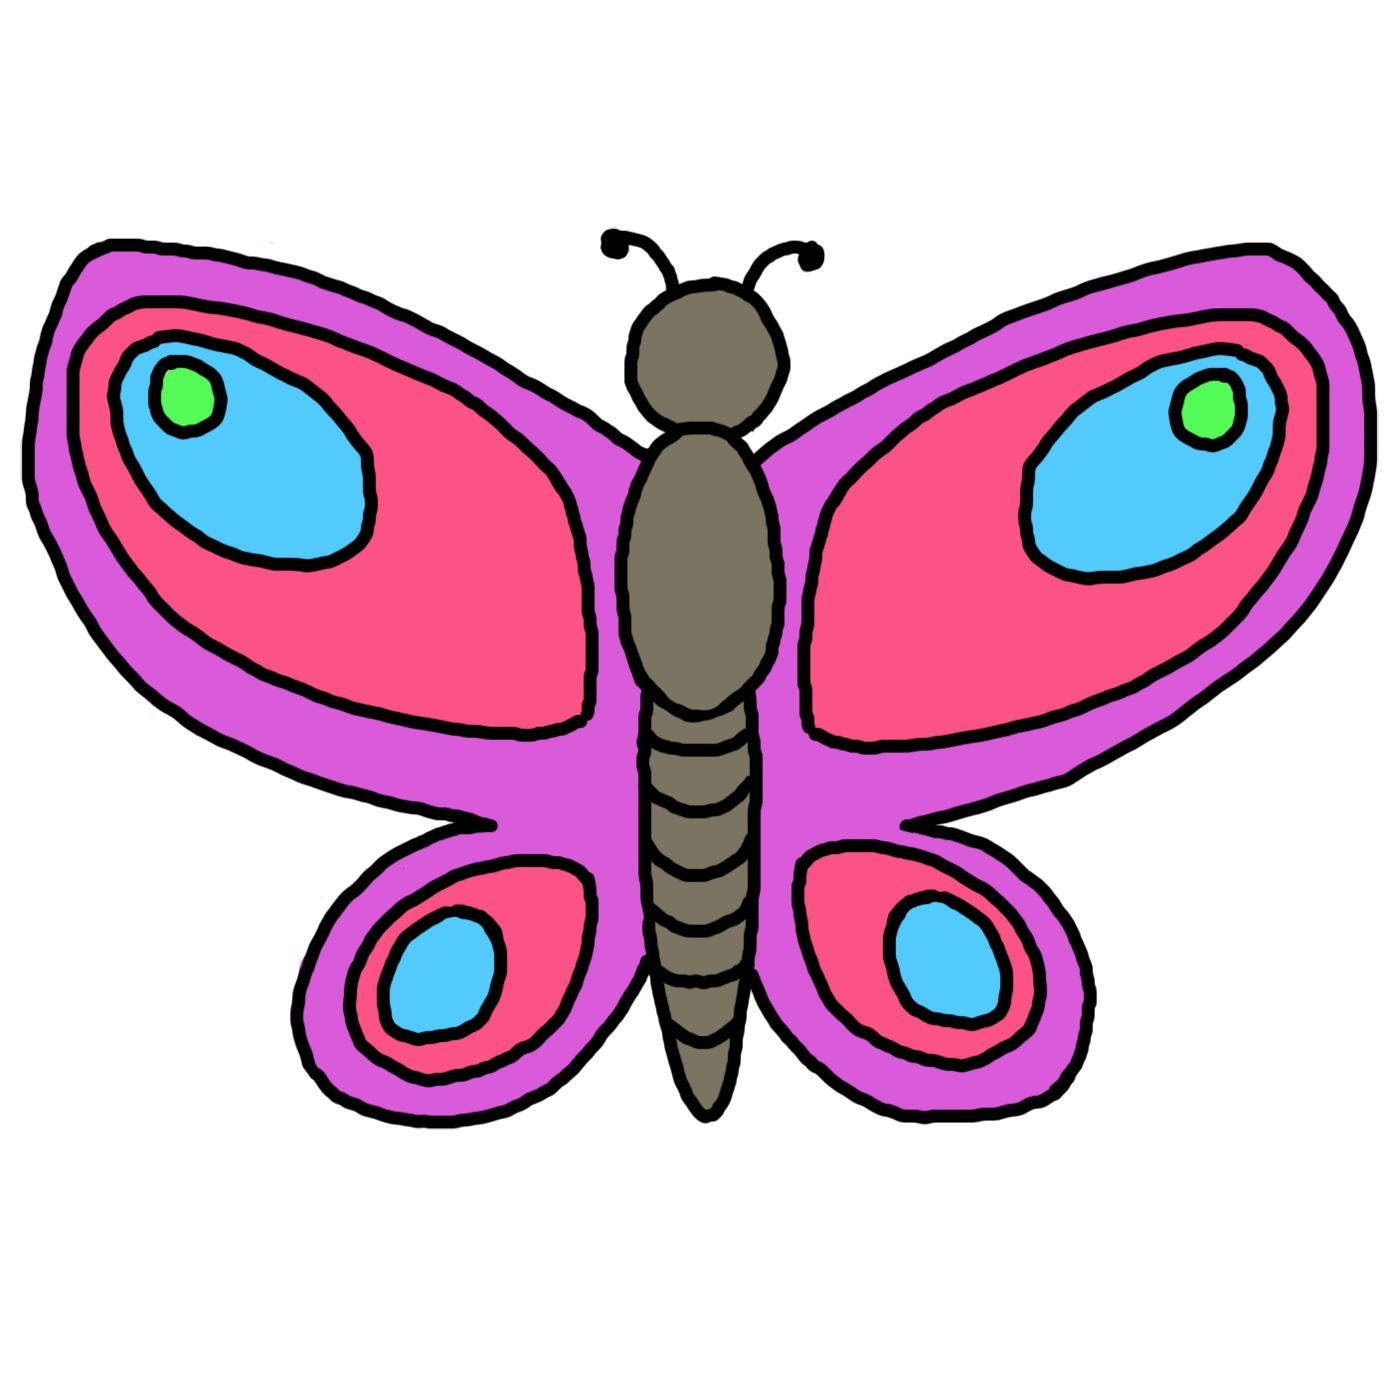 Simple Butterfly Clip Art Hd Images 3 HD Wallpapers | amagico.